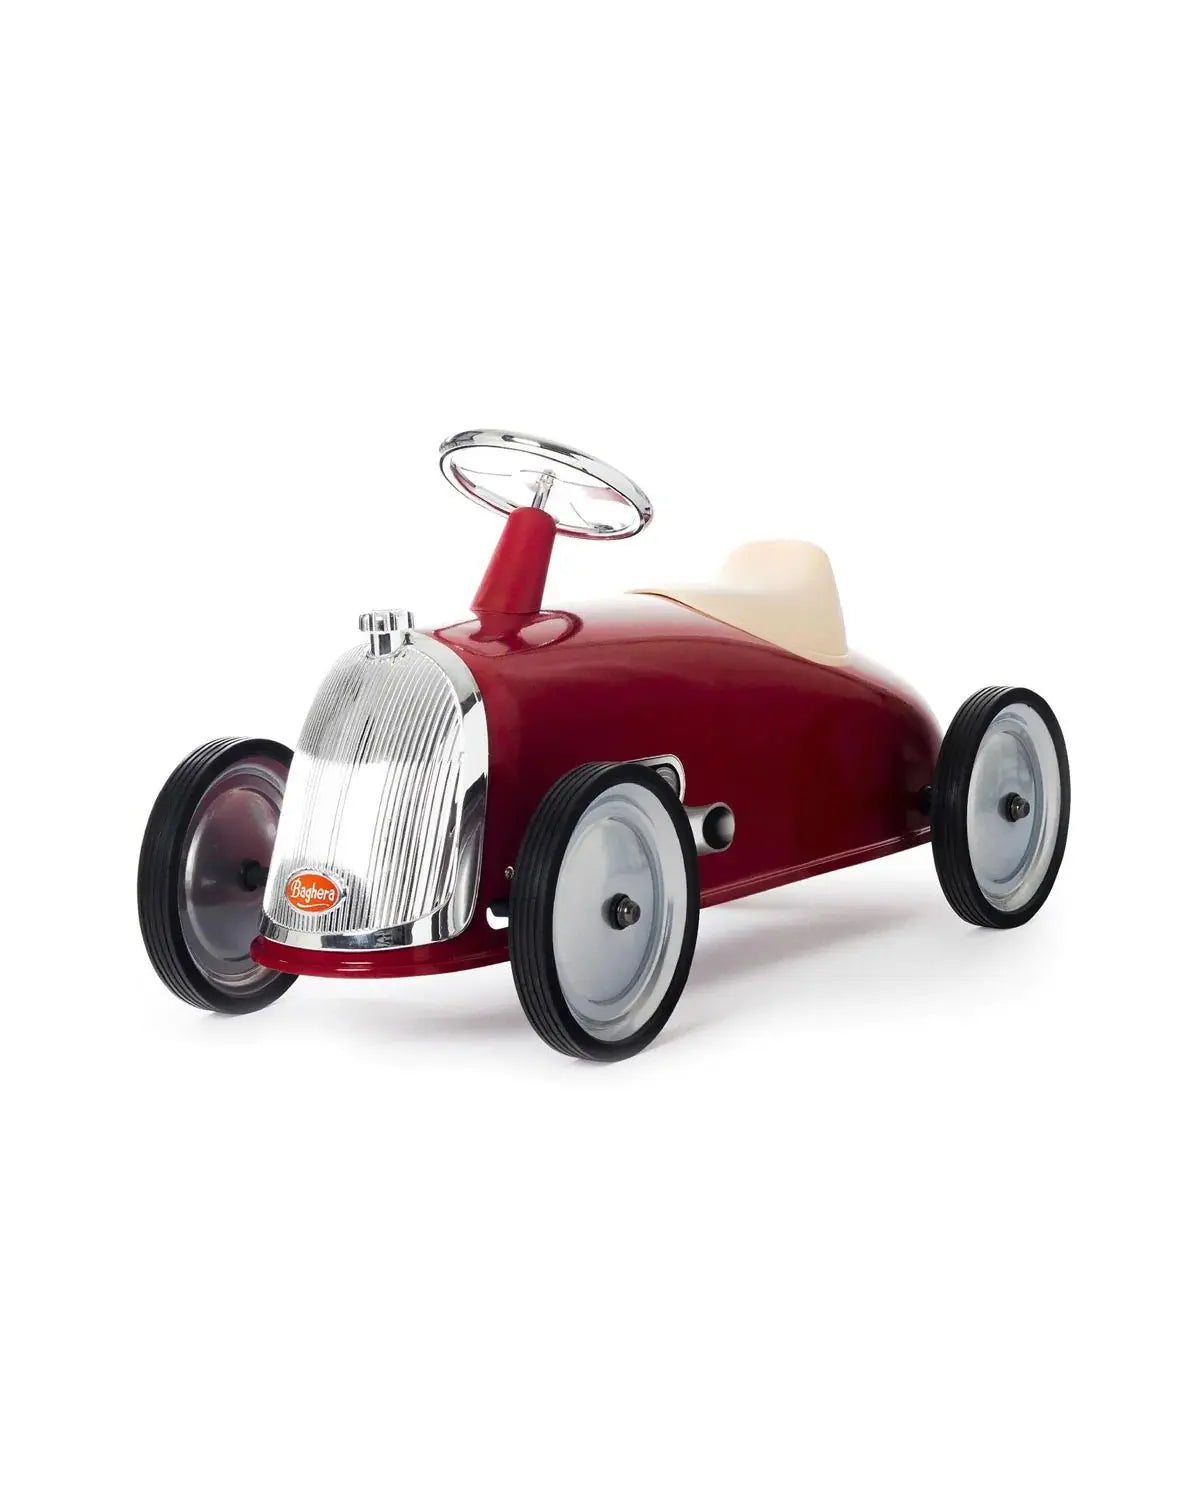 Ride-on Rider Toy Car, Durable Vintage Design, Classic Style, Kids Ride On, Retro Inspired  Baghera Red  